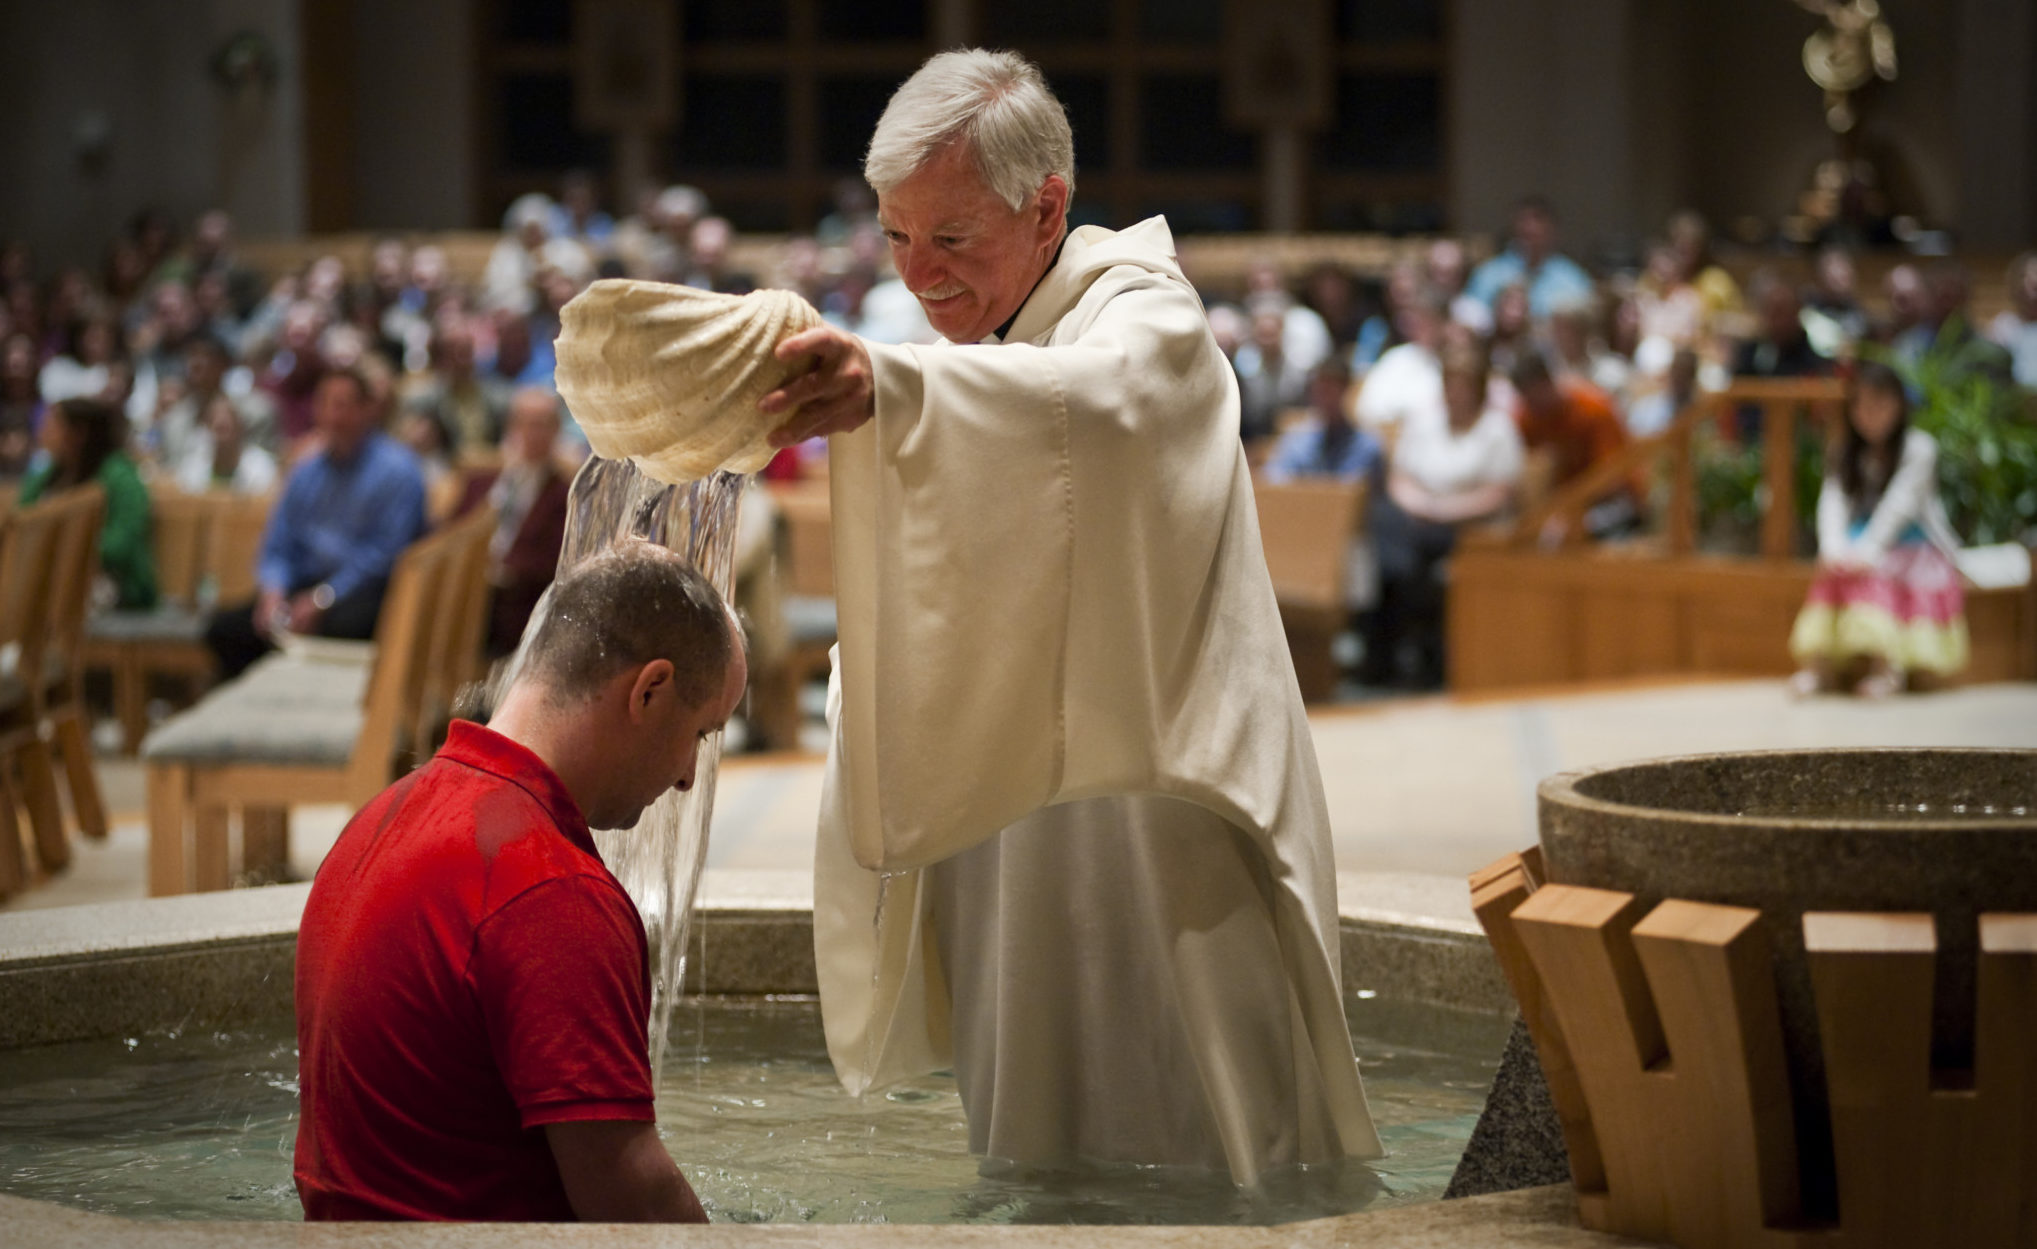 Moving Towards Baptism and Welcoming the Newcomer